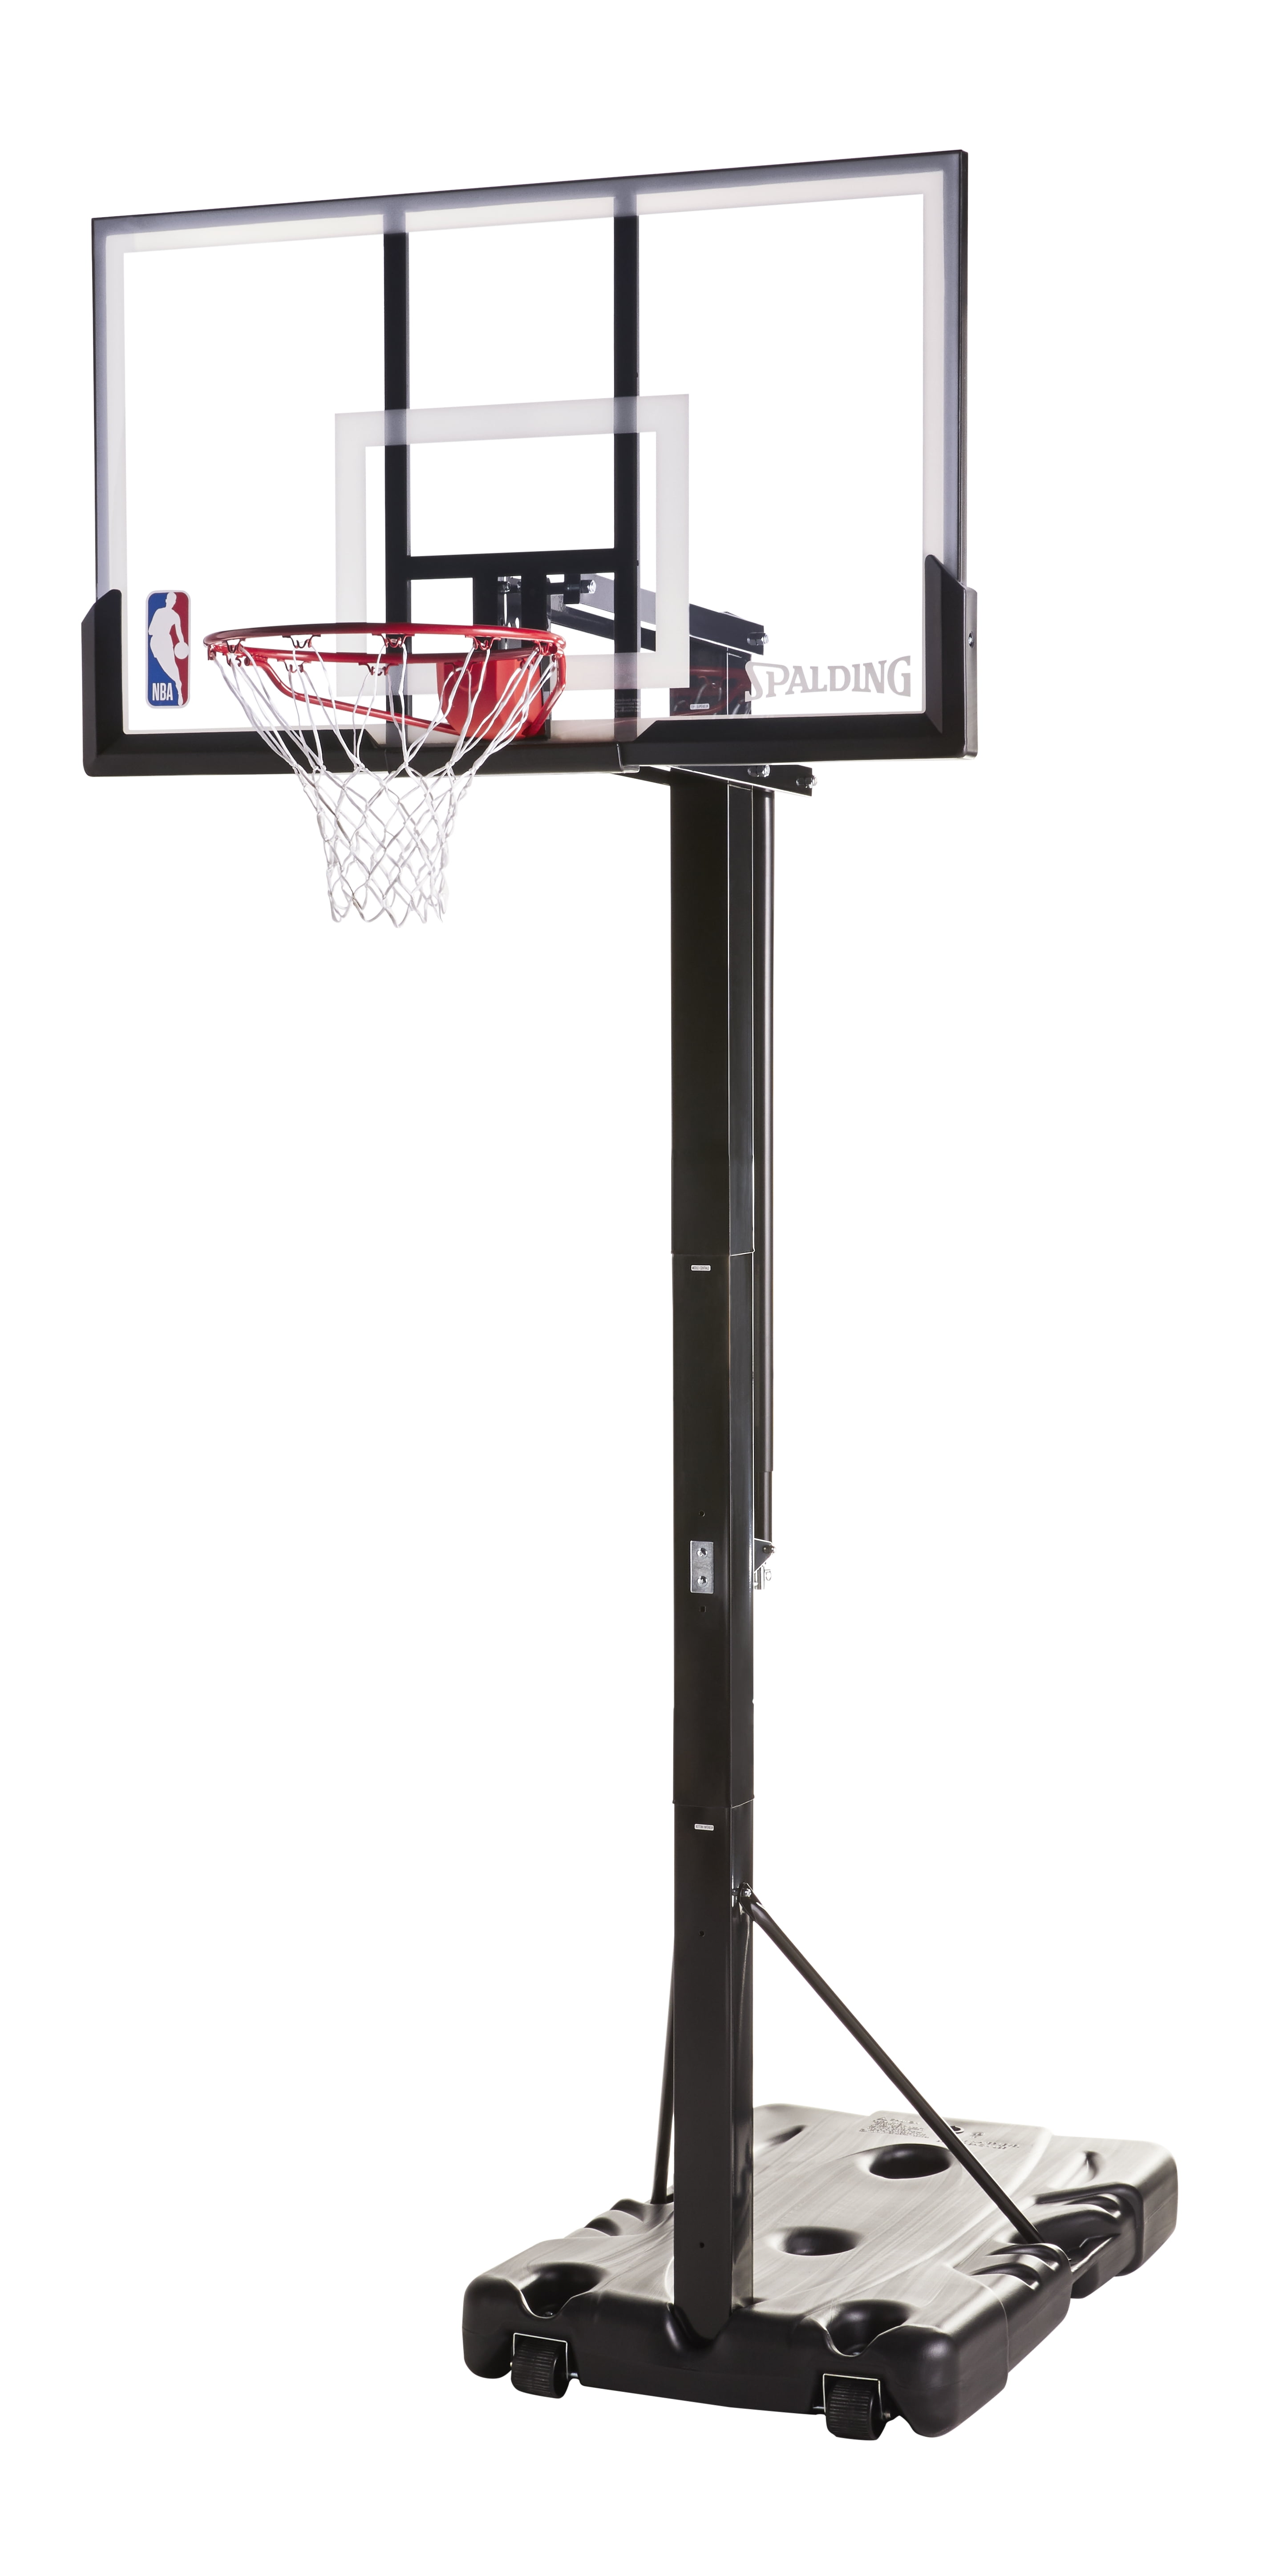 NBA Official 54-inch wall-mounted basketball backboard with hoop for $99 -  Clark Deals